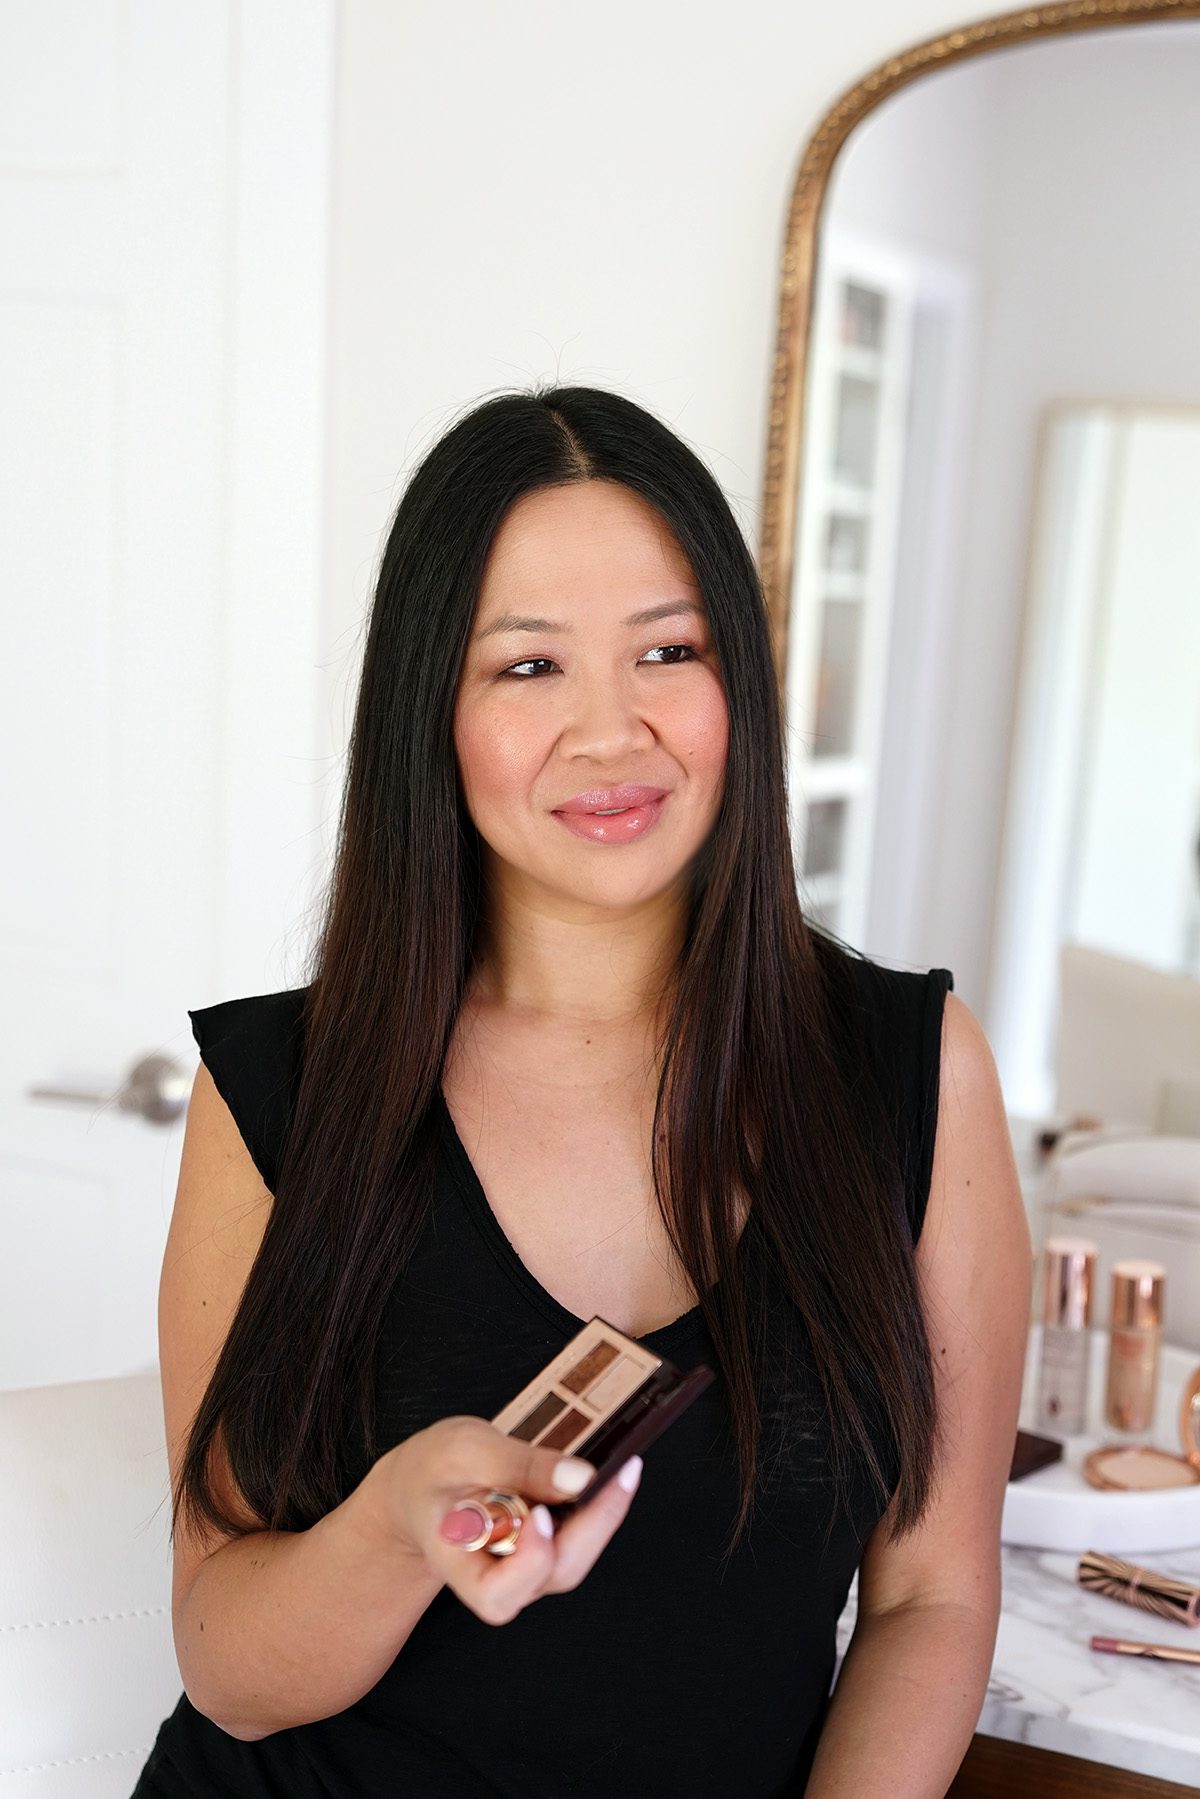 Charlotte Tilbury Hotlips 2 In Love with Olivia